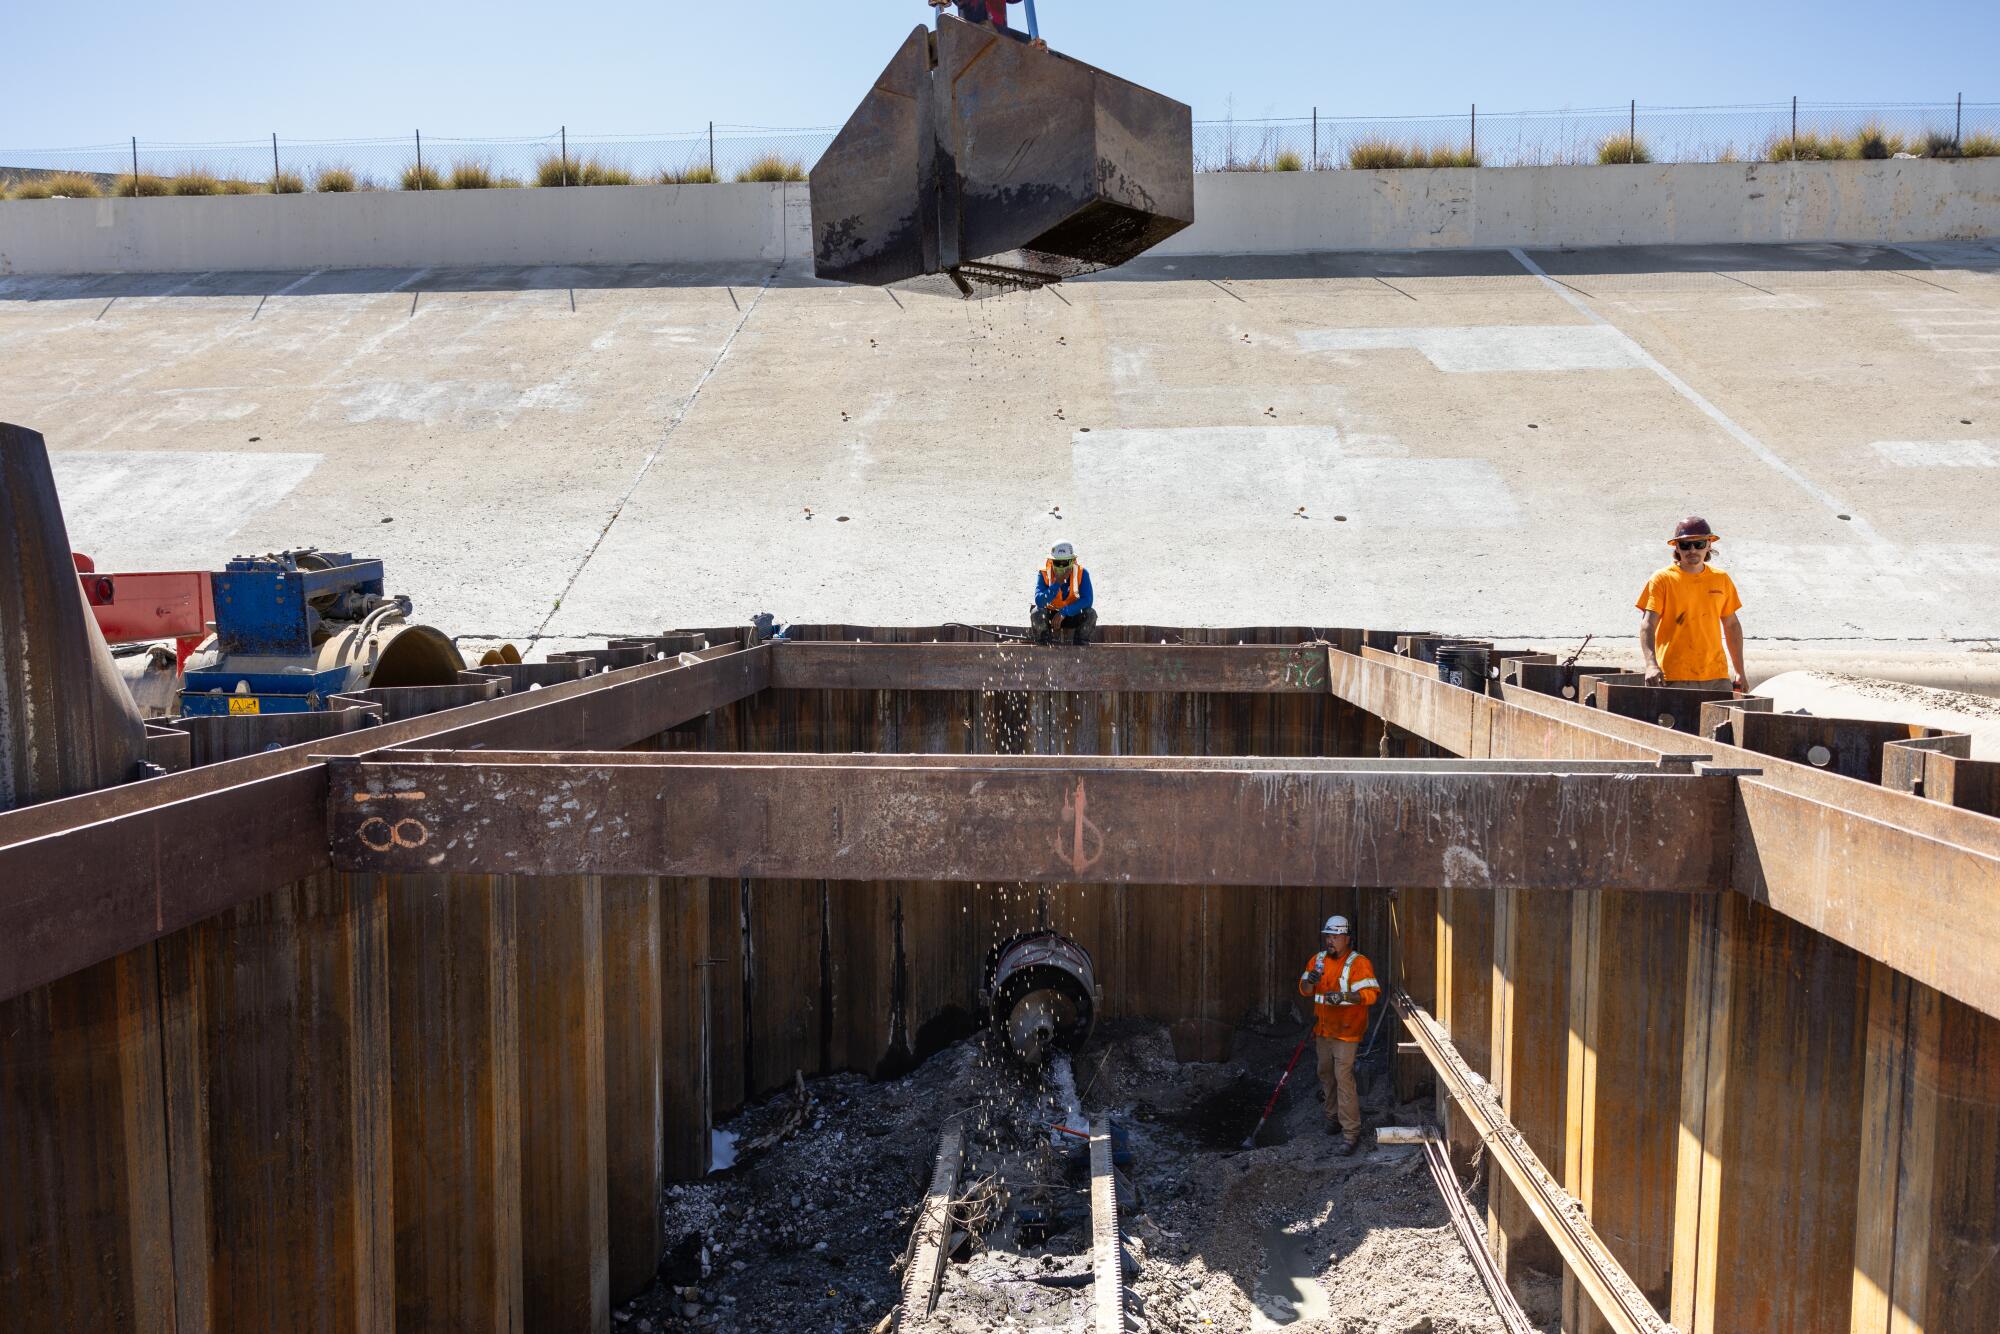 Construction workers in safety vests look over a dig pit in the concrete bed of the L.A. River.